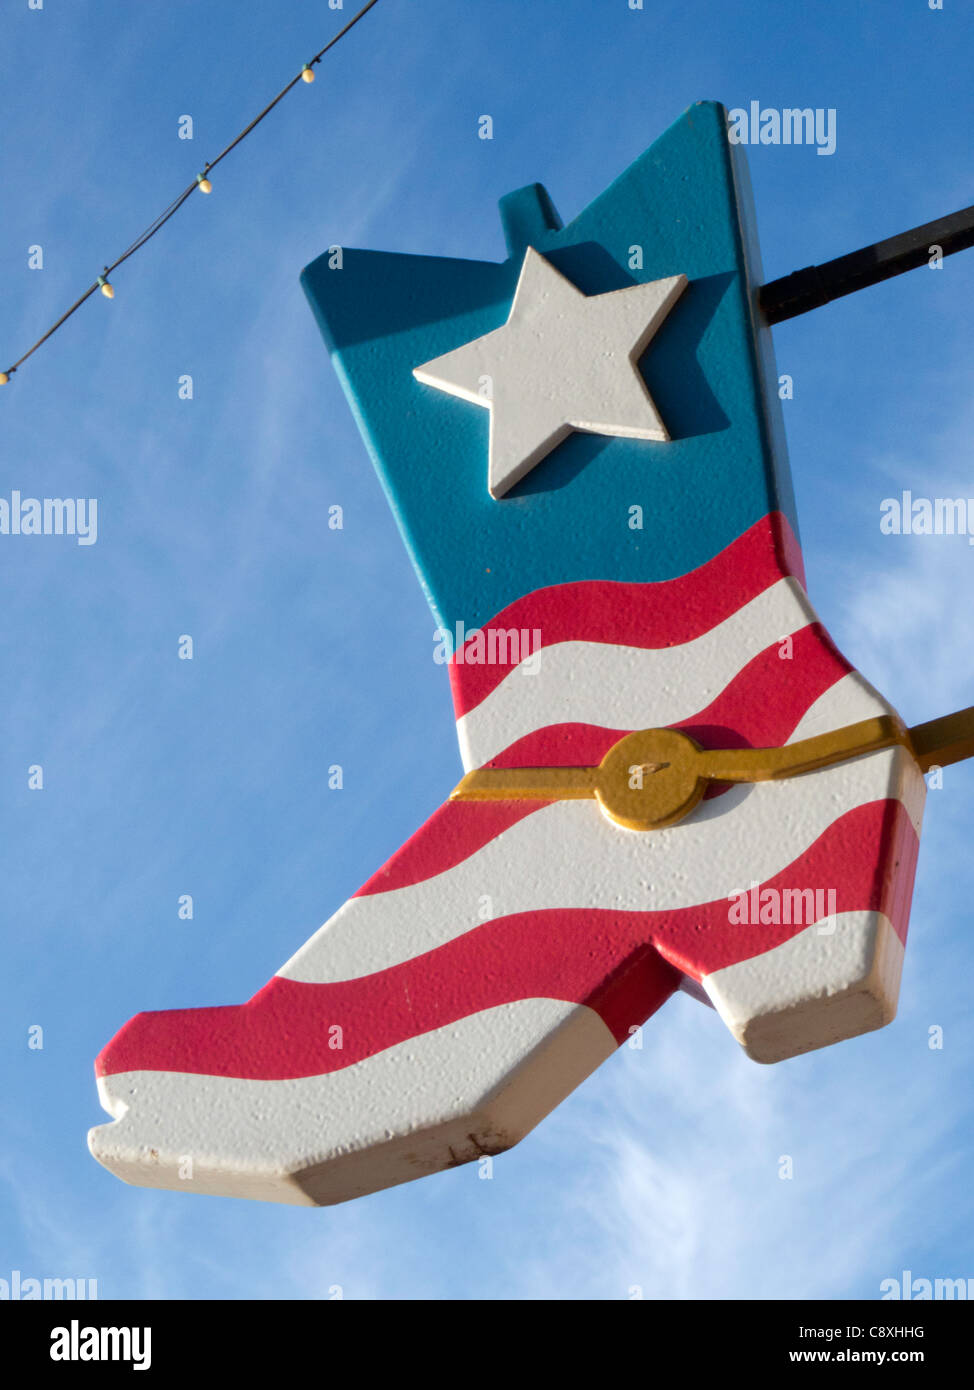 All-American cowboy boot on light pole in Old Town Scottsdale, Arizona Stock Photo